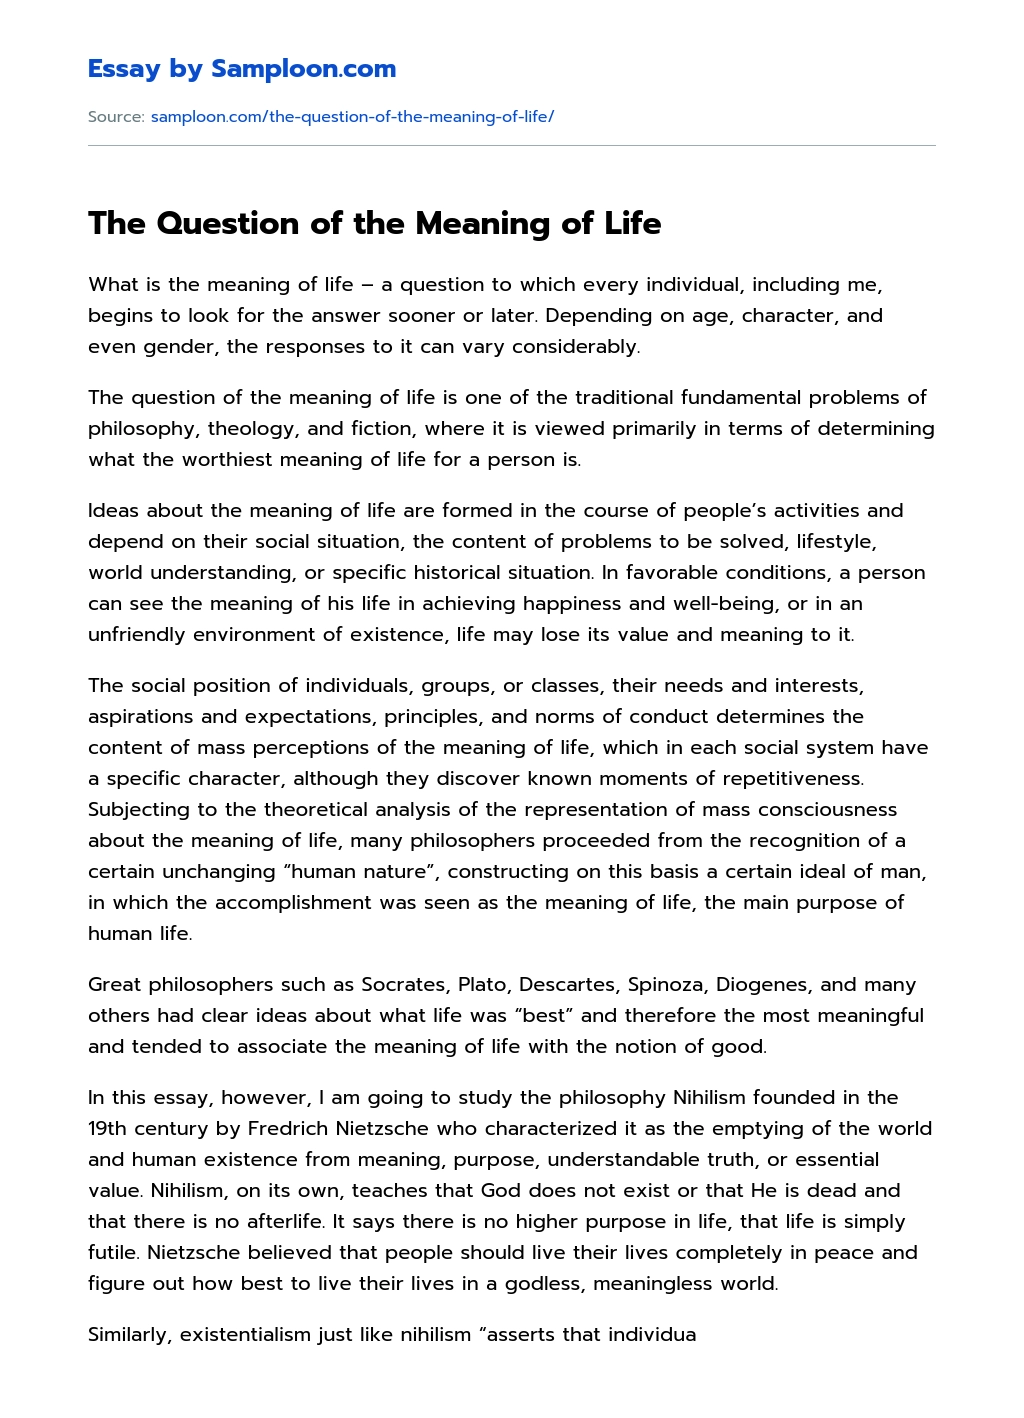 The Question of the Meaning of Life essay